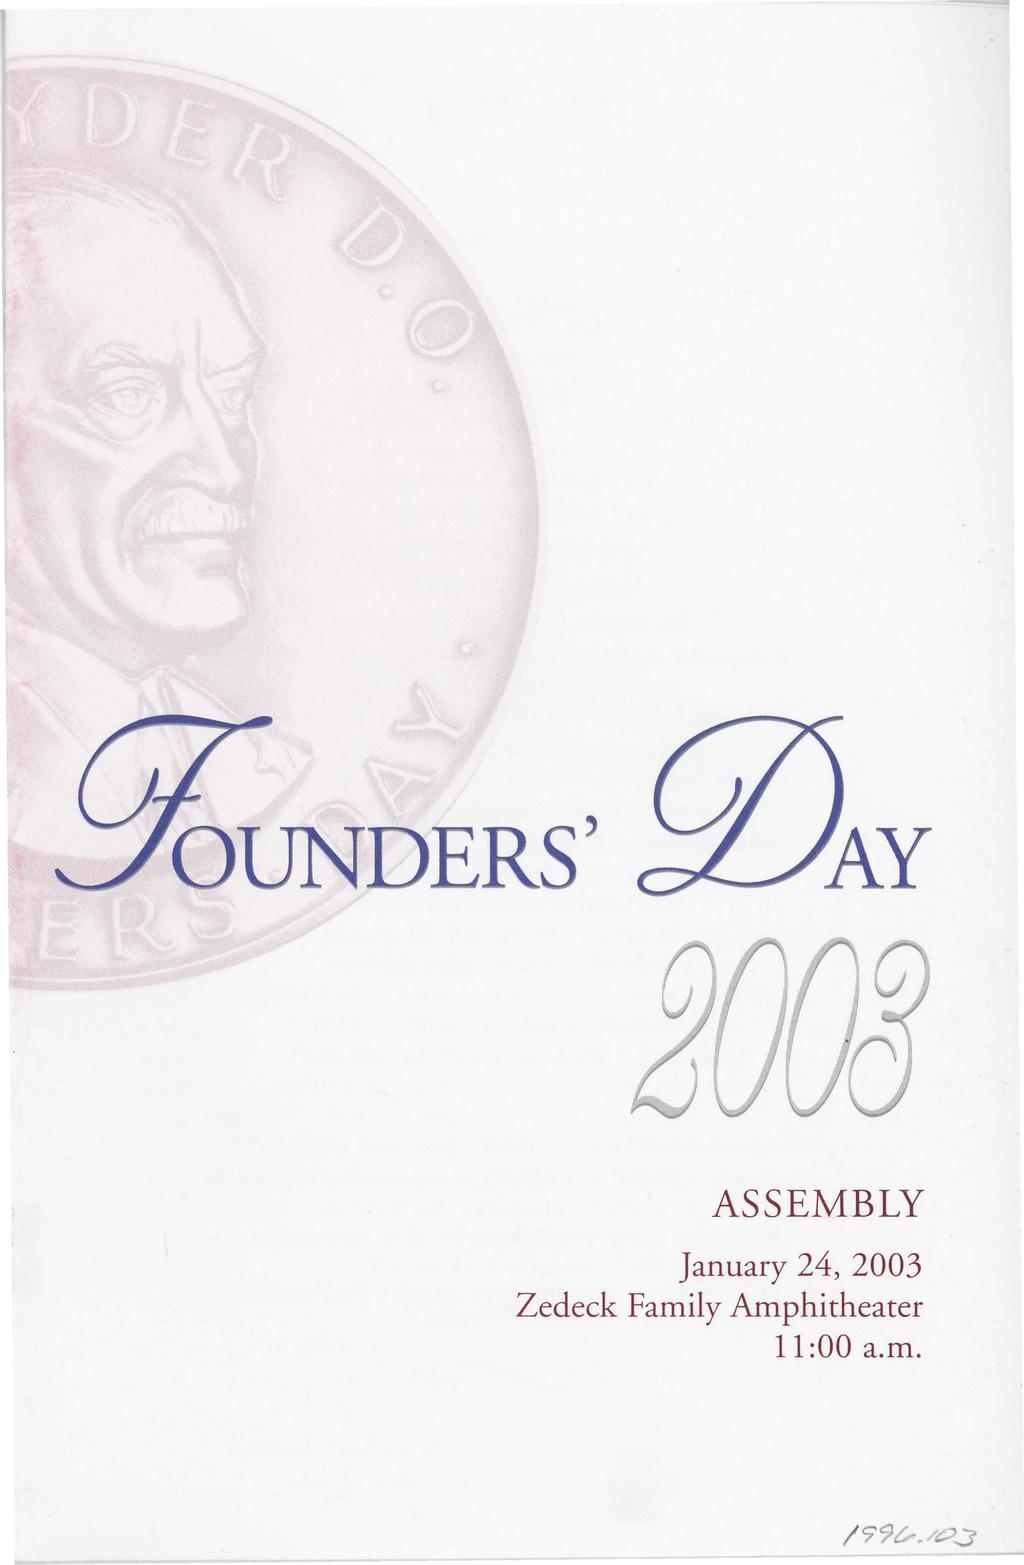 OUNDERS' ASSEMBLY January 24, 2003